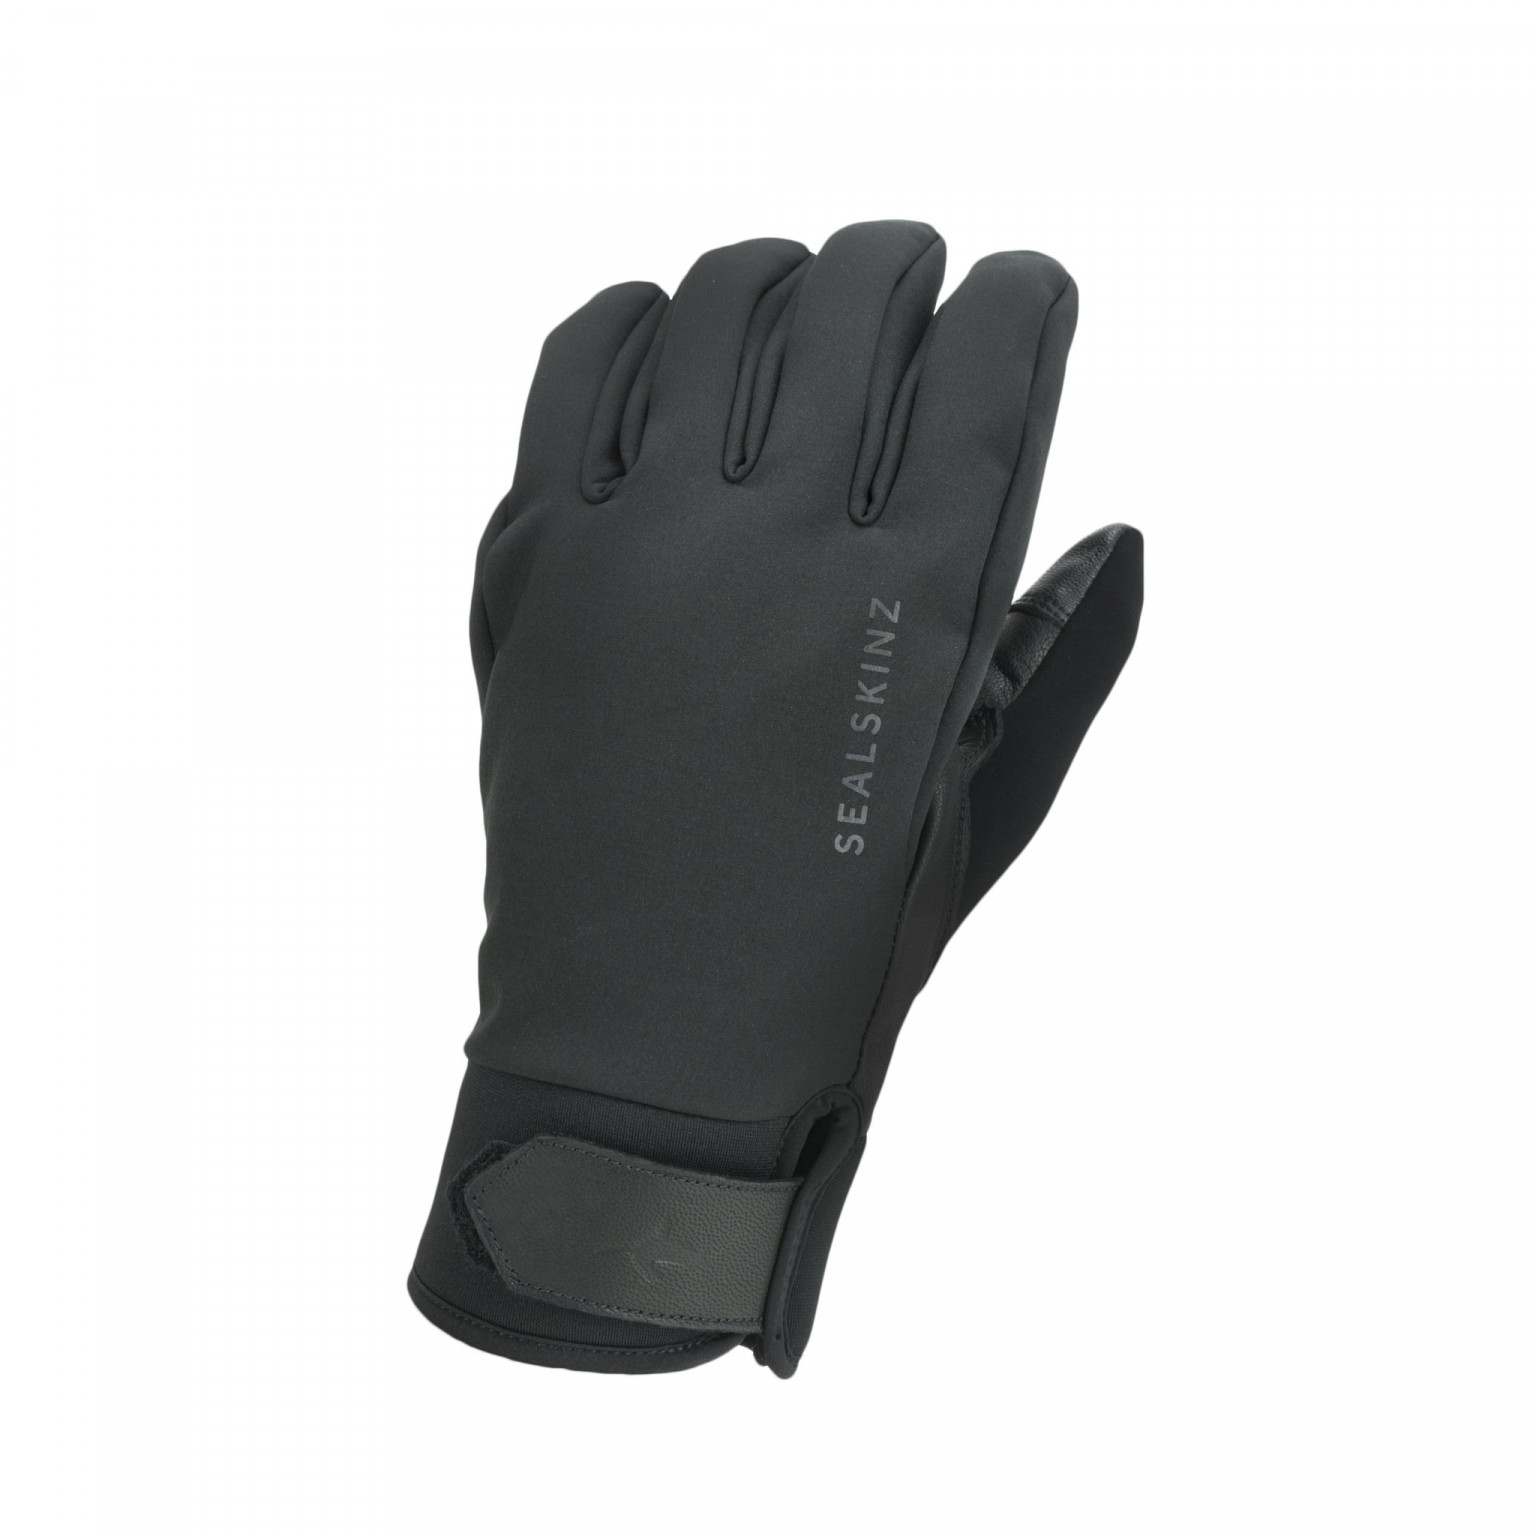 Sealskinz Wp All Weather Insulated Glove Black